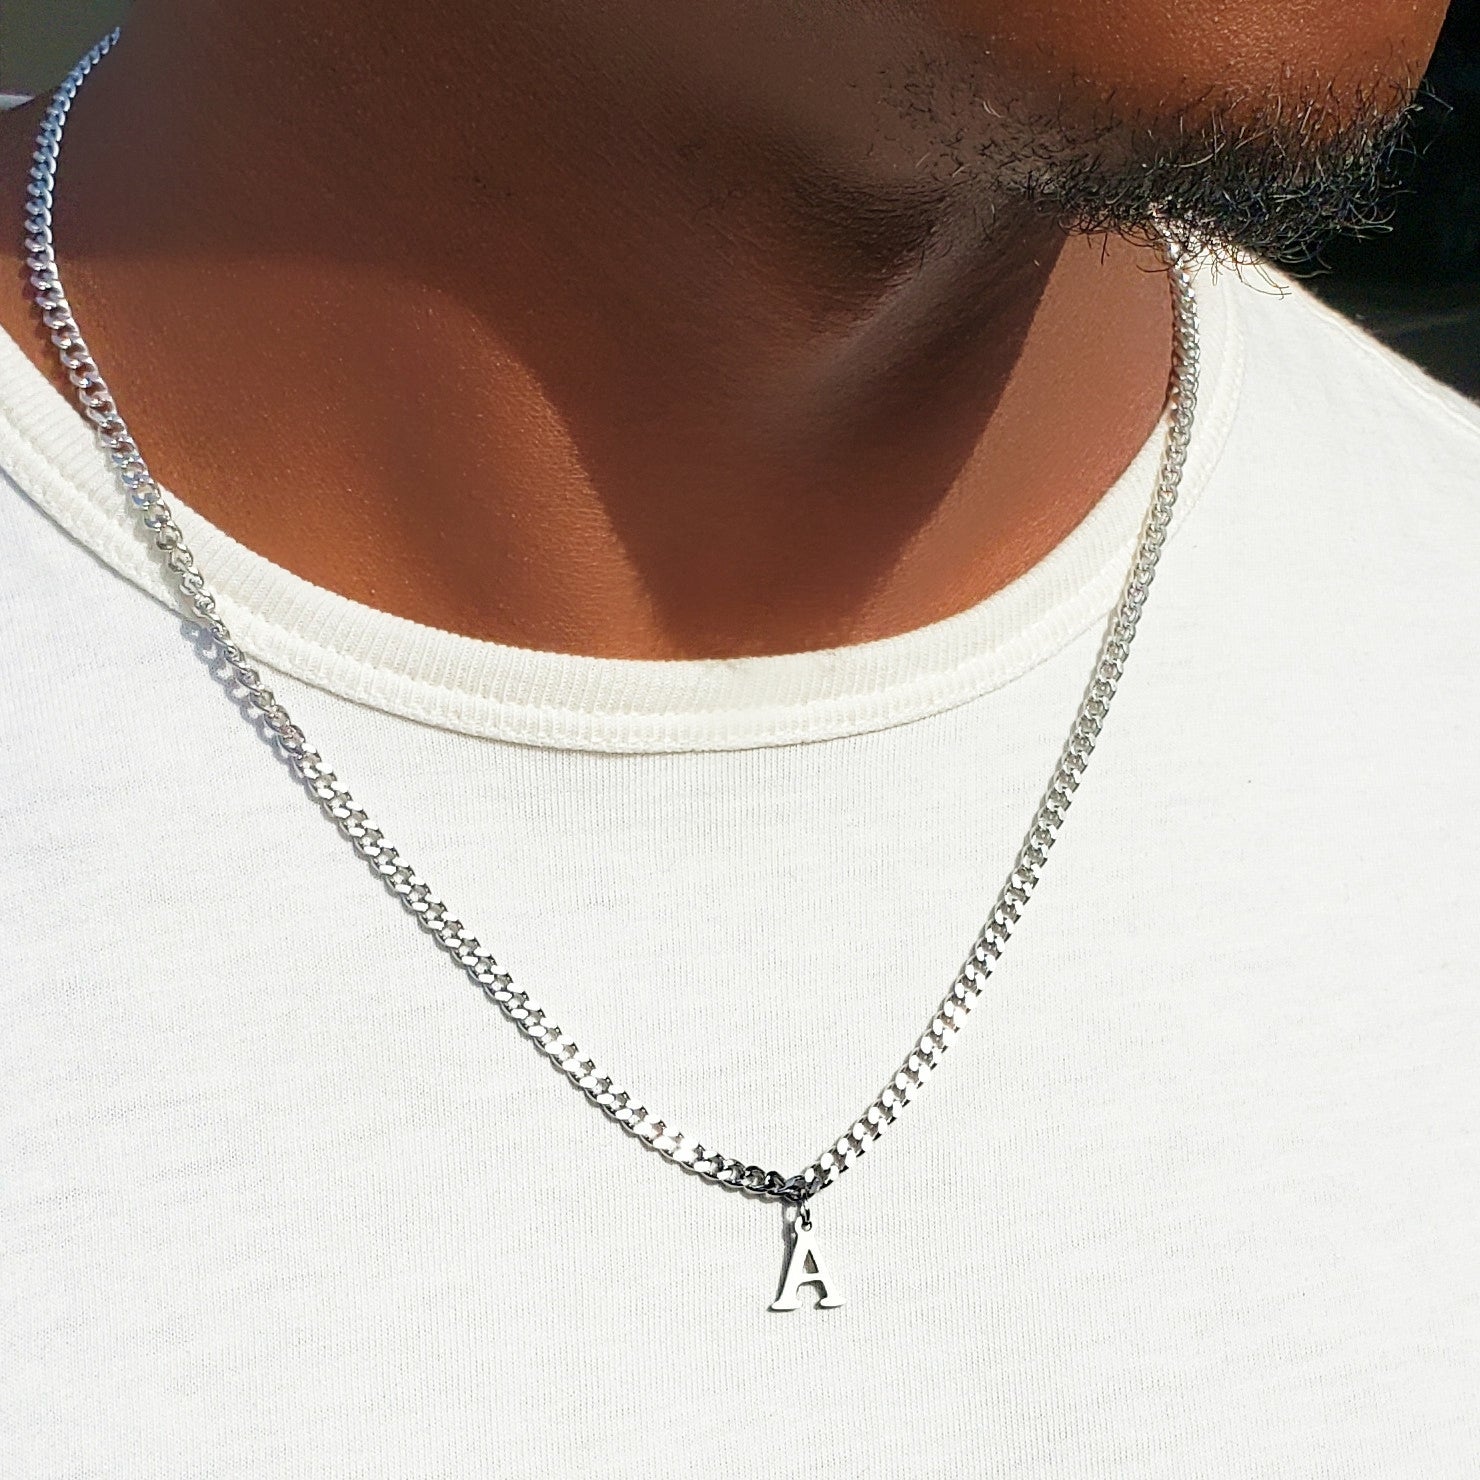 Initial B Crown Necklace for Men Initial B Chain Boyfriend Name Chain Gold  Plated with 22 Inch Chain | Amazon.com